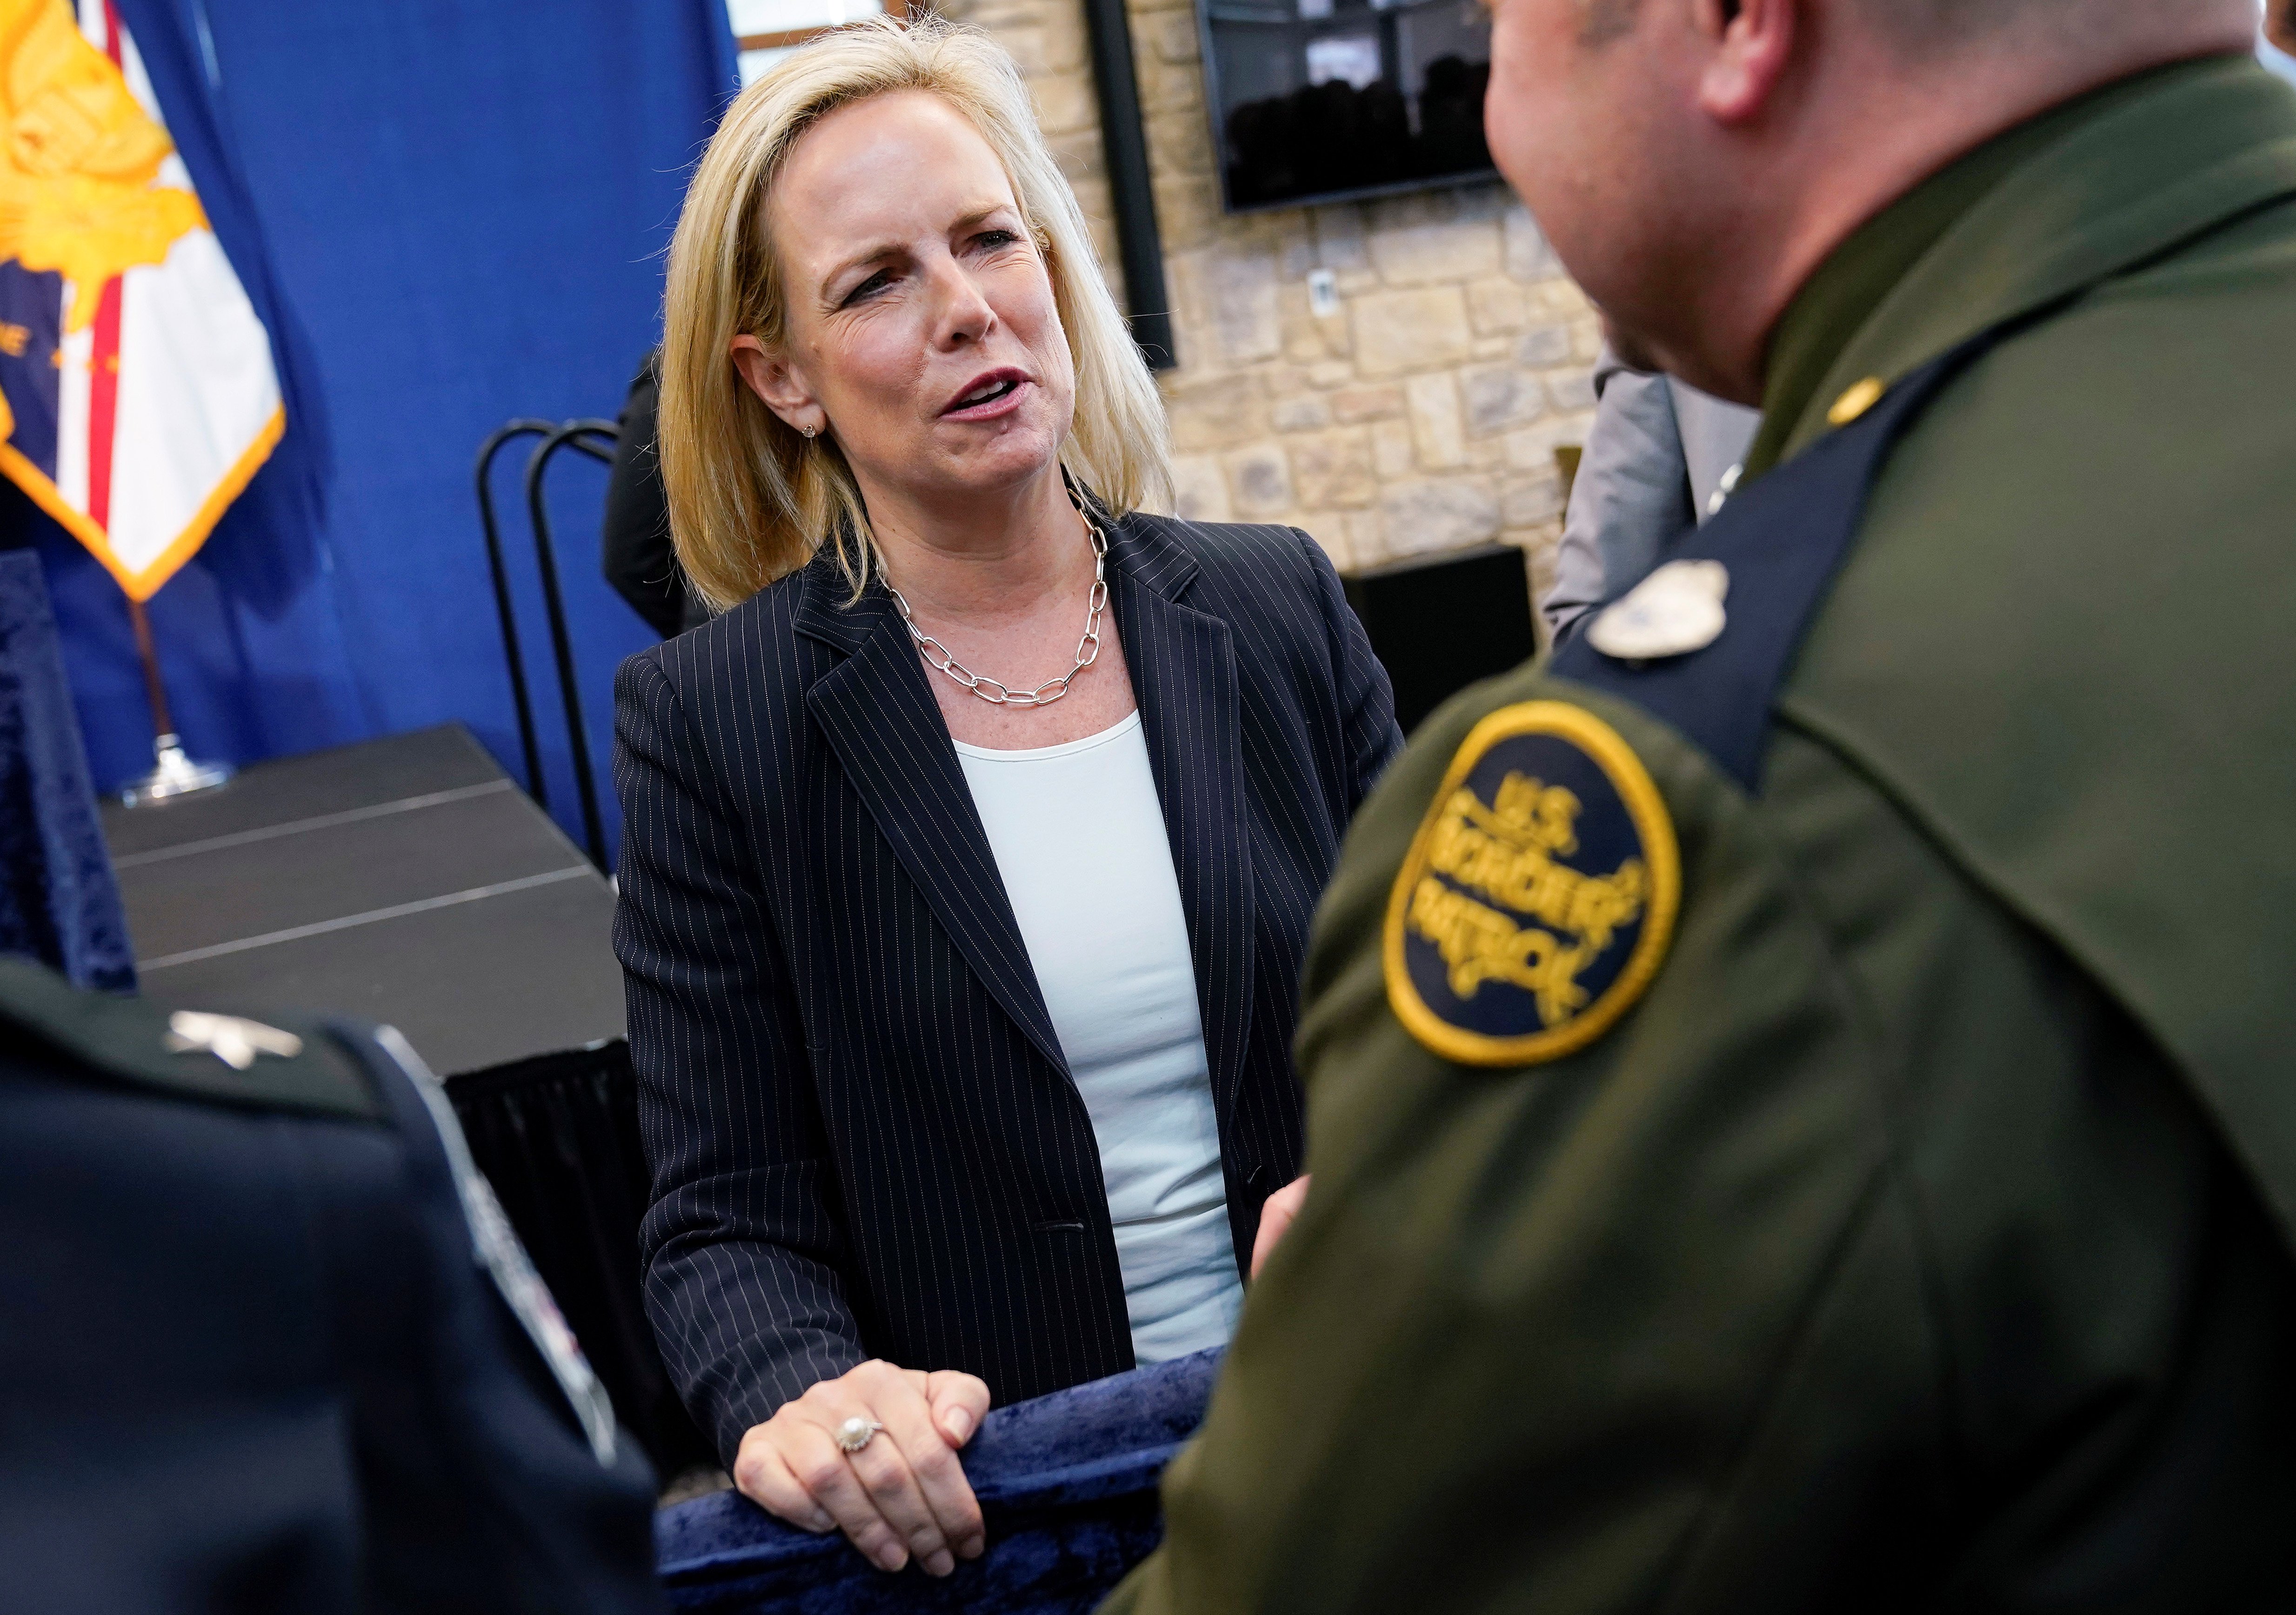 U.S. Secretary of Homeland Security Kirstjen Nielsen greets a member of the U.S. Border Patrol at the U.S. Customs and Border Protection Advanced Training Facility in Harpers Ferry, West Virginia, U.S., March 13, 2019. REUTERS/Joshua Roberts 